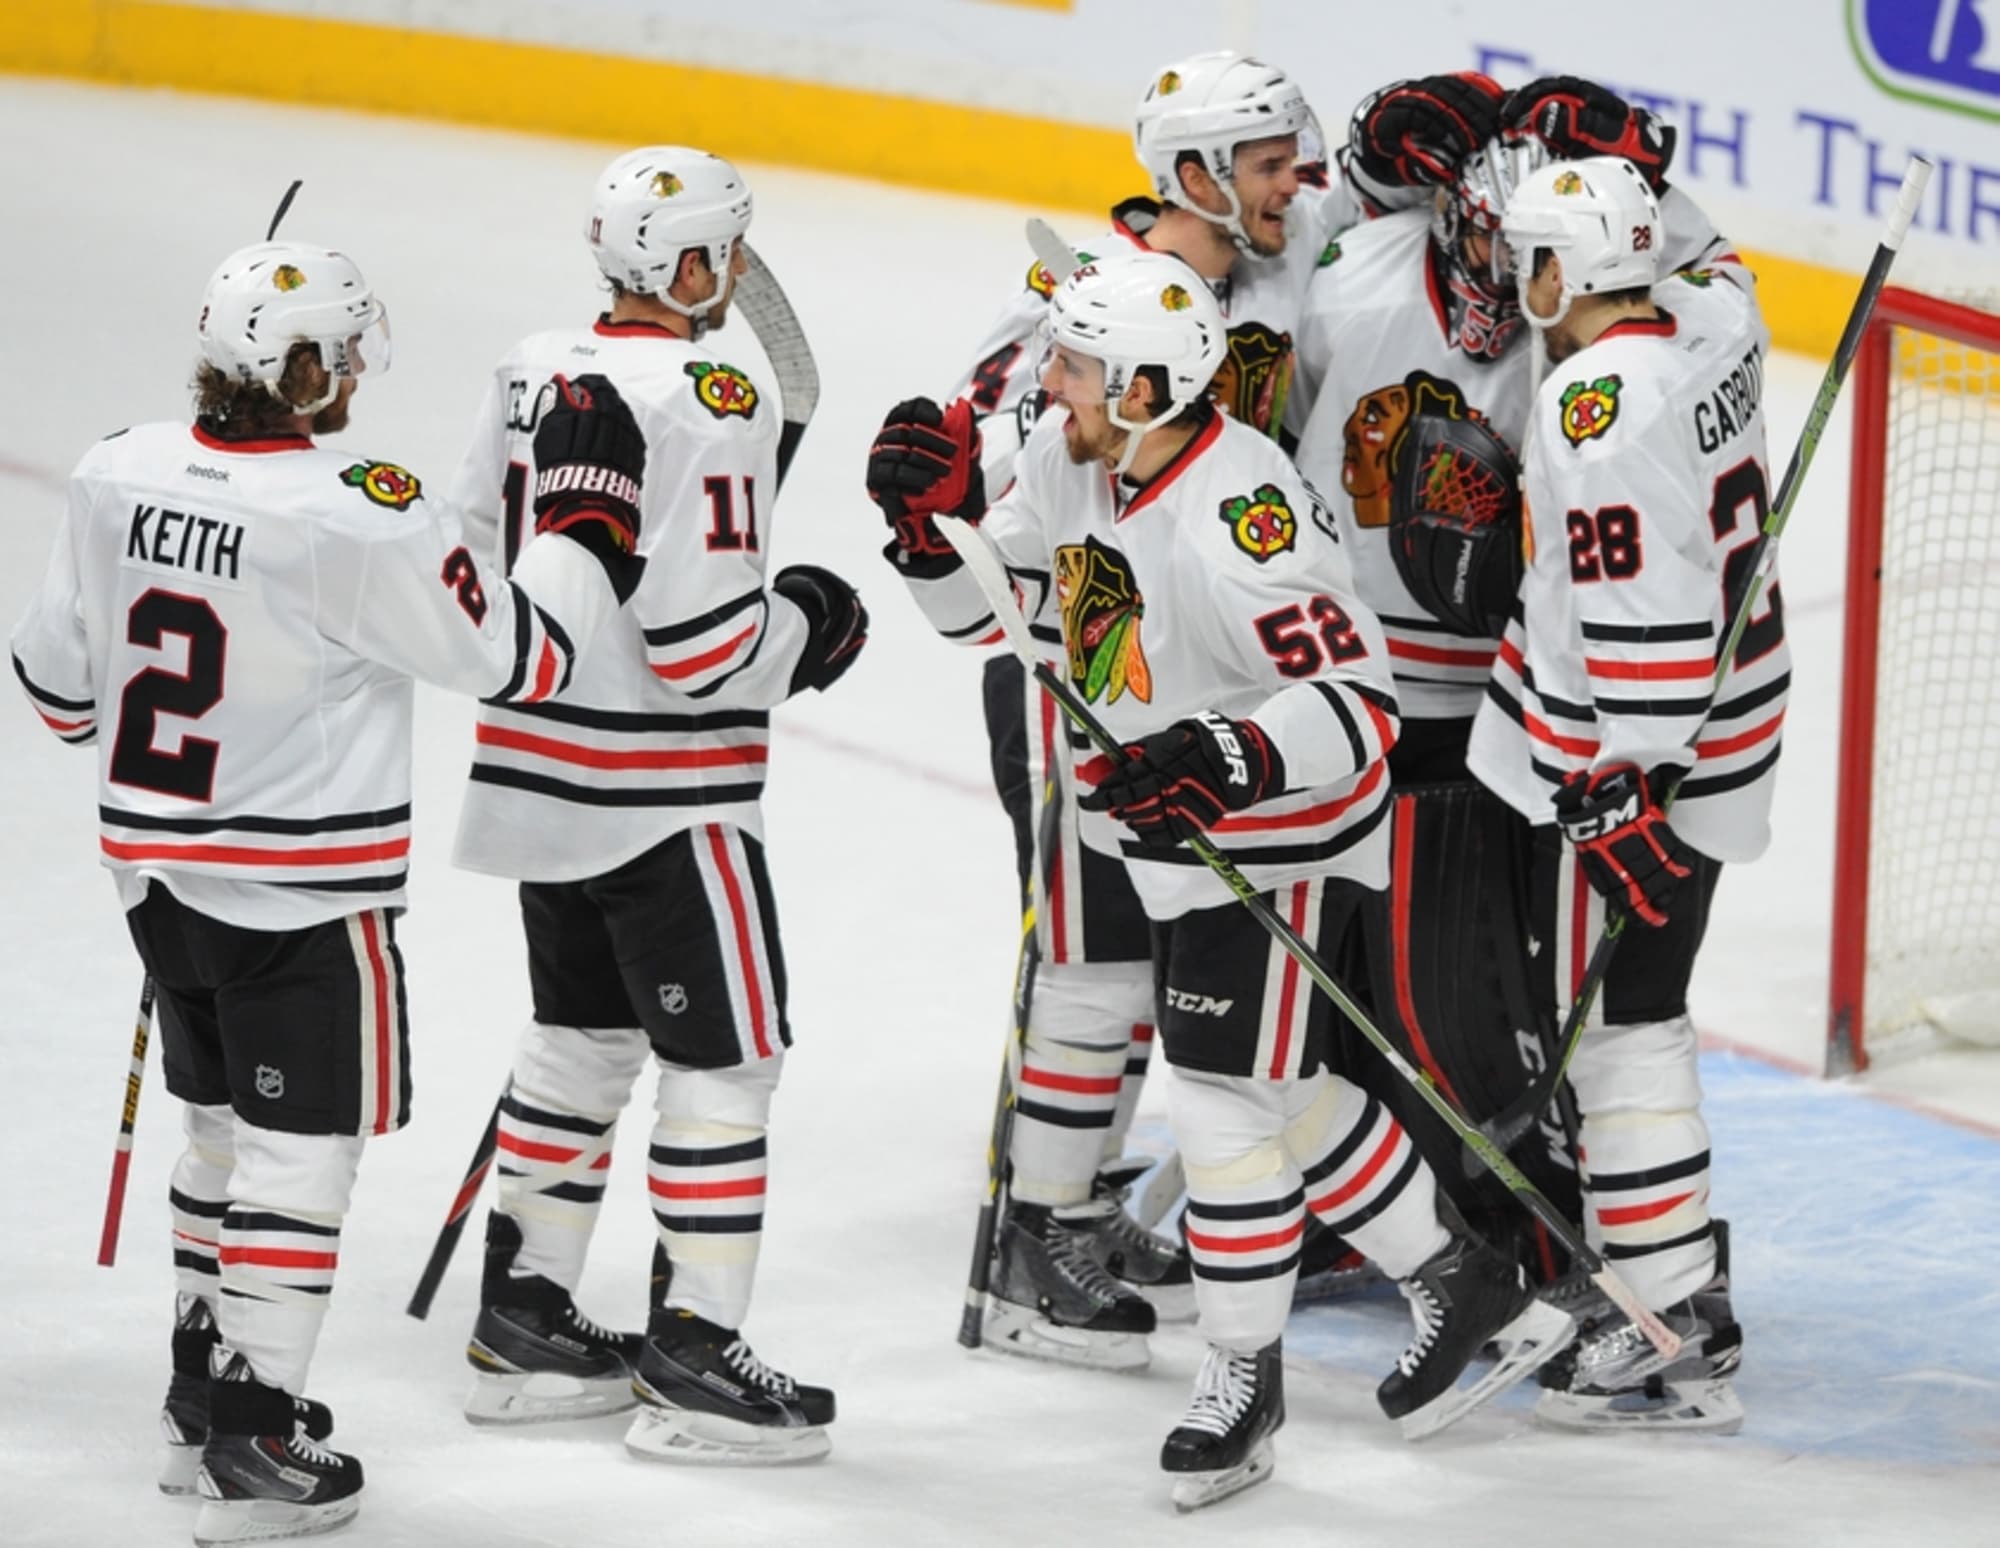 Chicago Blackhawks Set Franchise Record With 12th Straight Victory